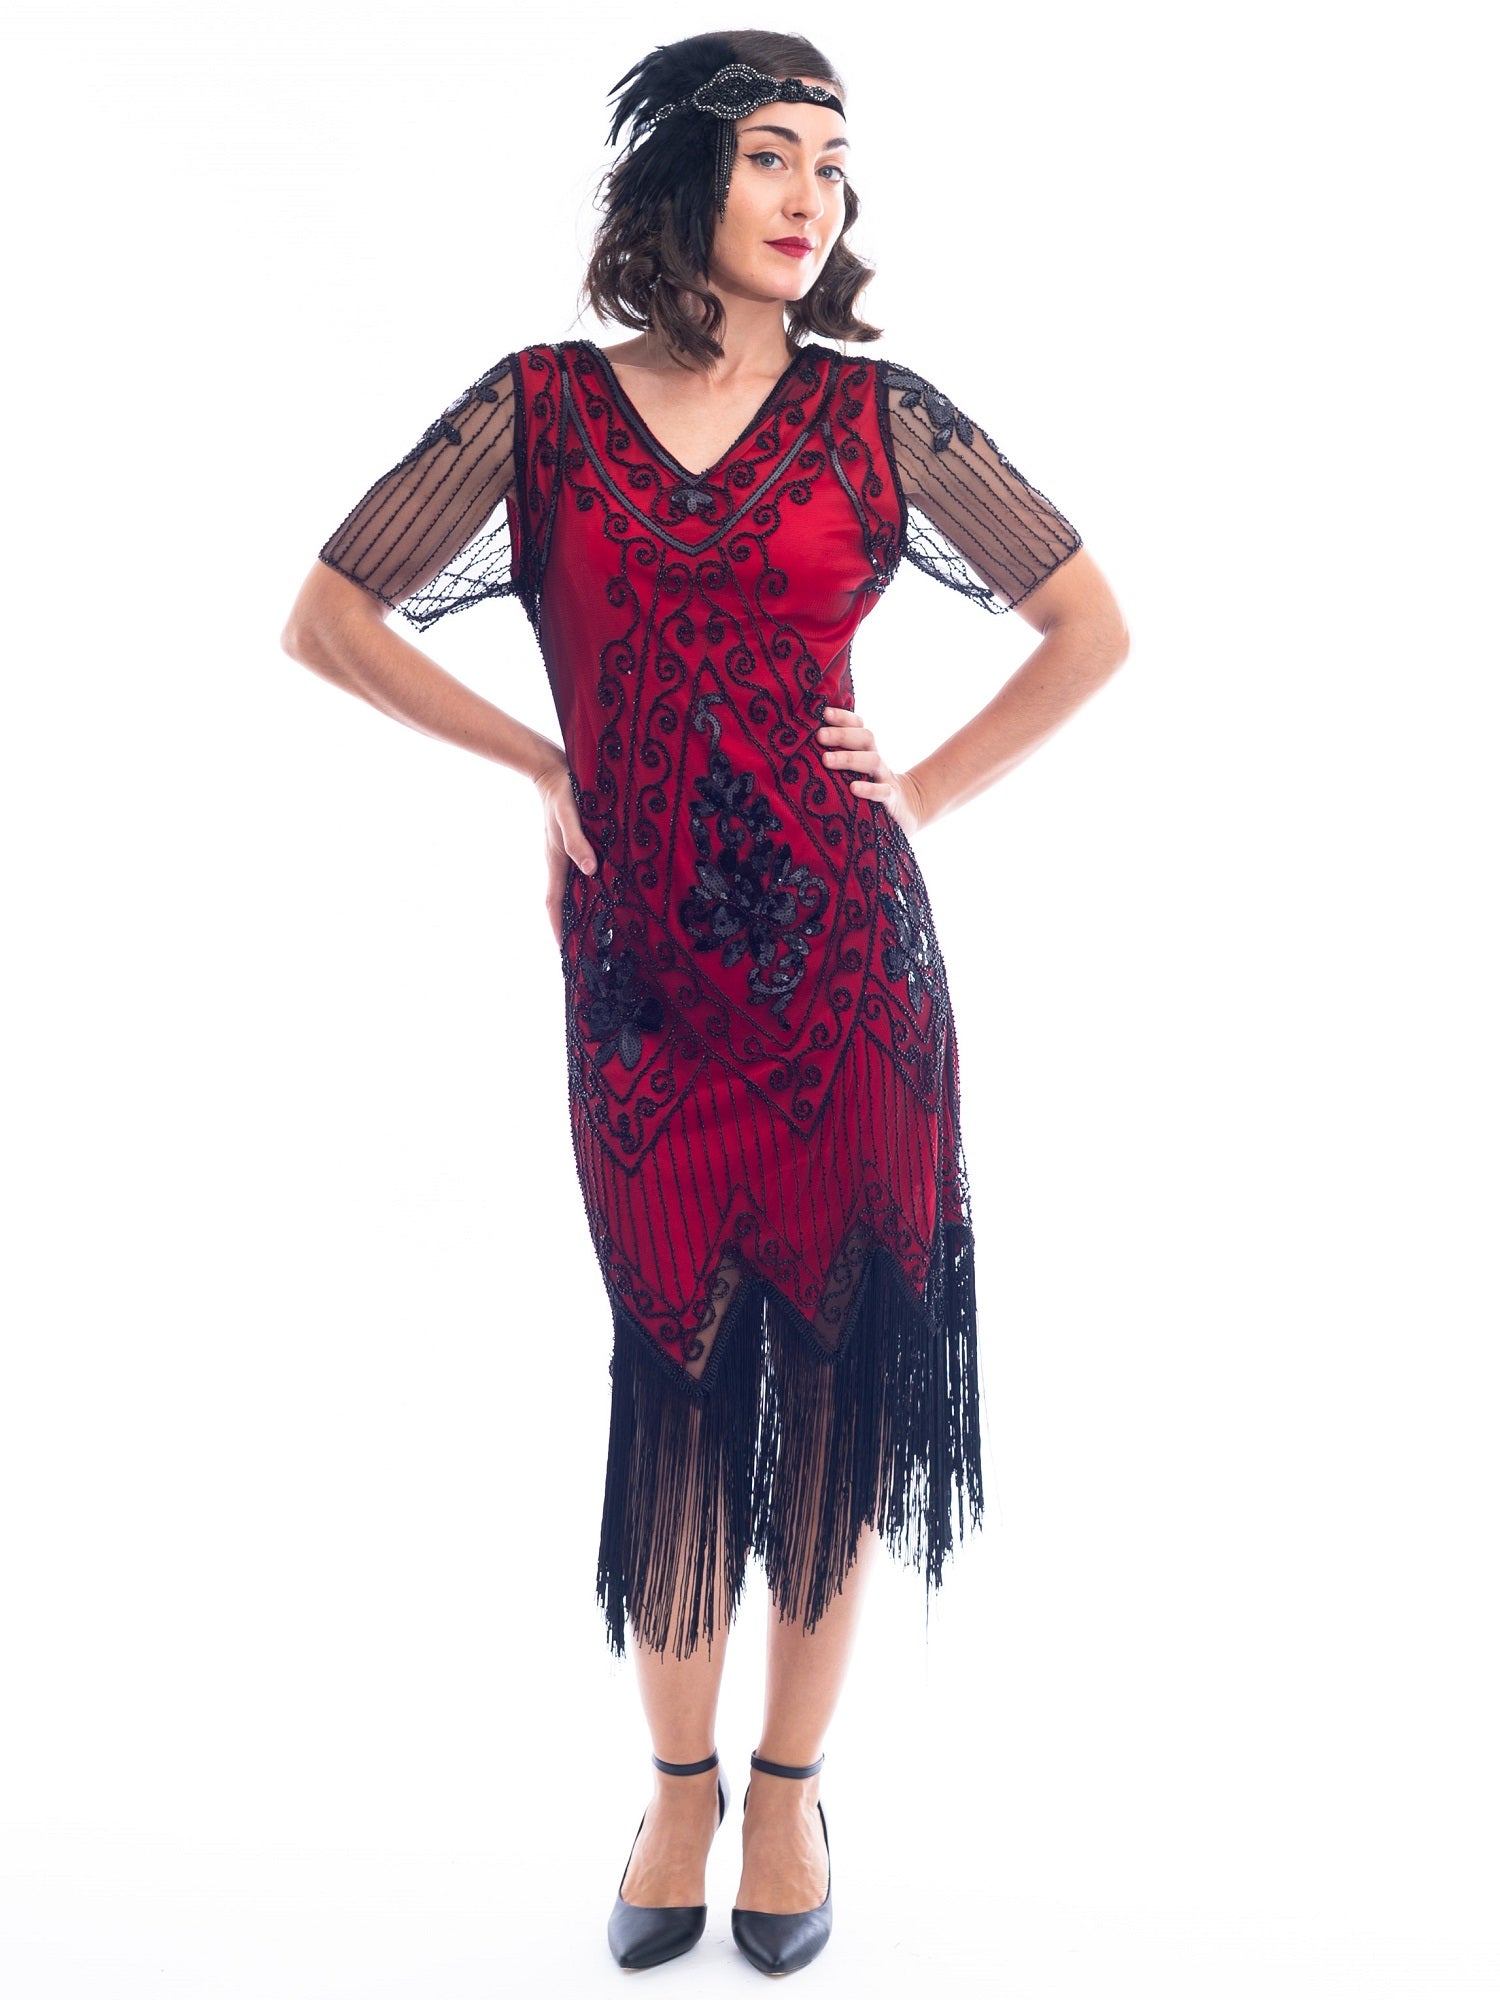 A burgundy red 1920s Flapper Dress with black beads, sequins, sheer sleeves and black fringes